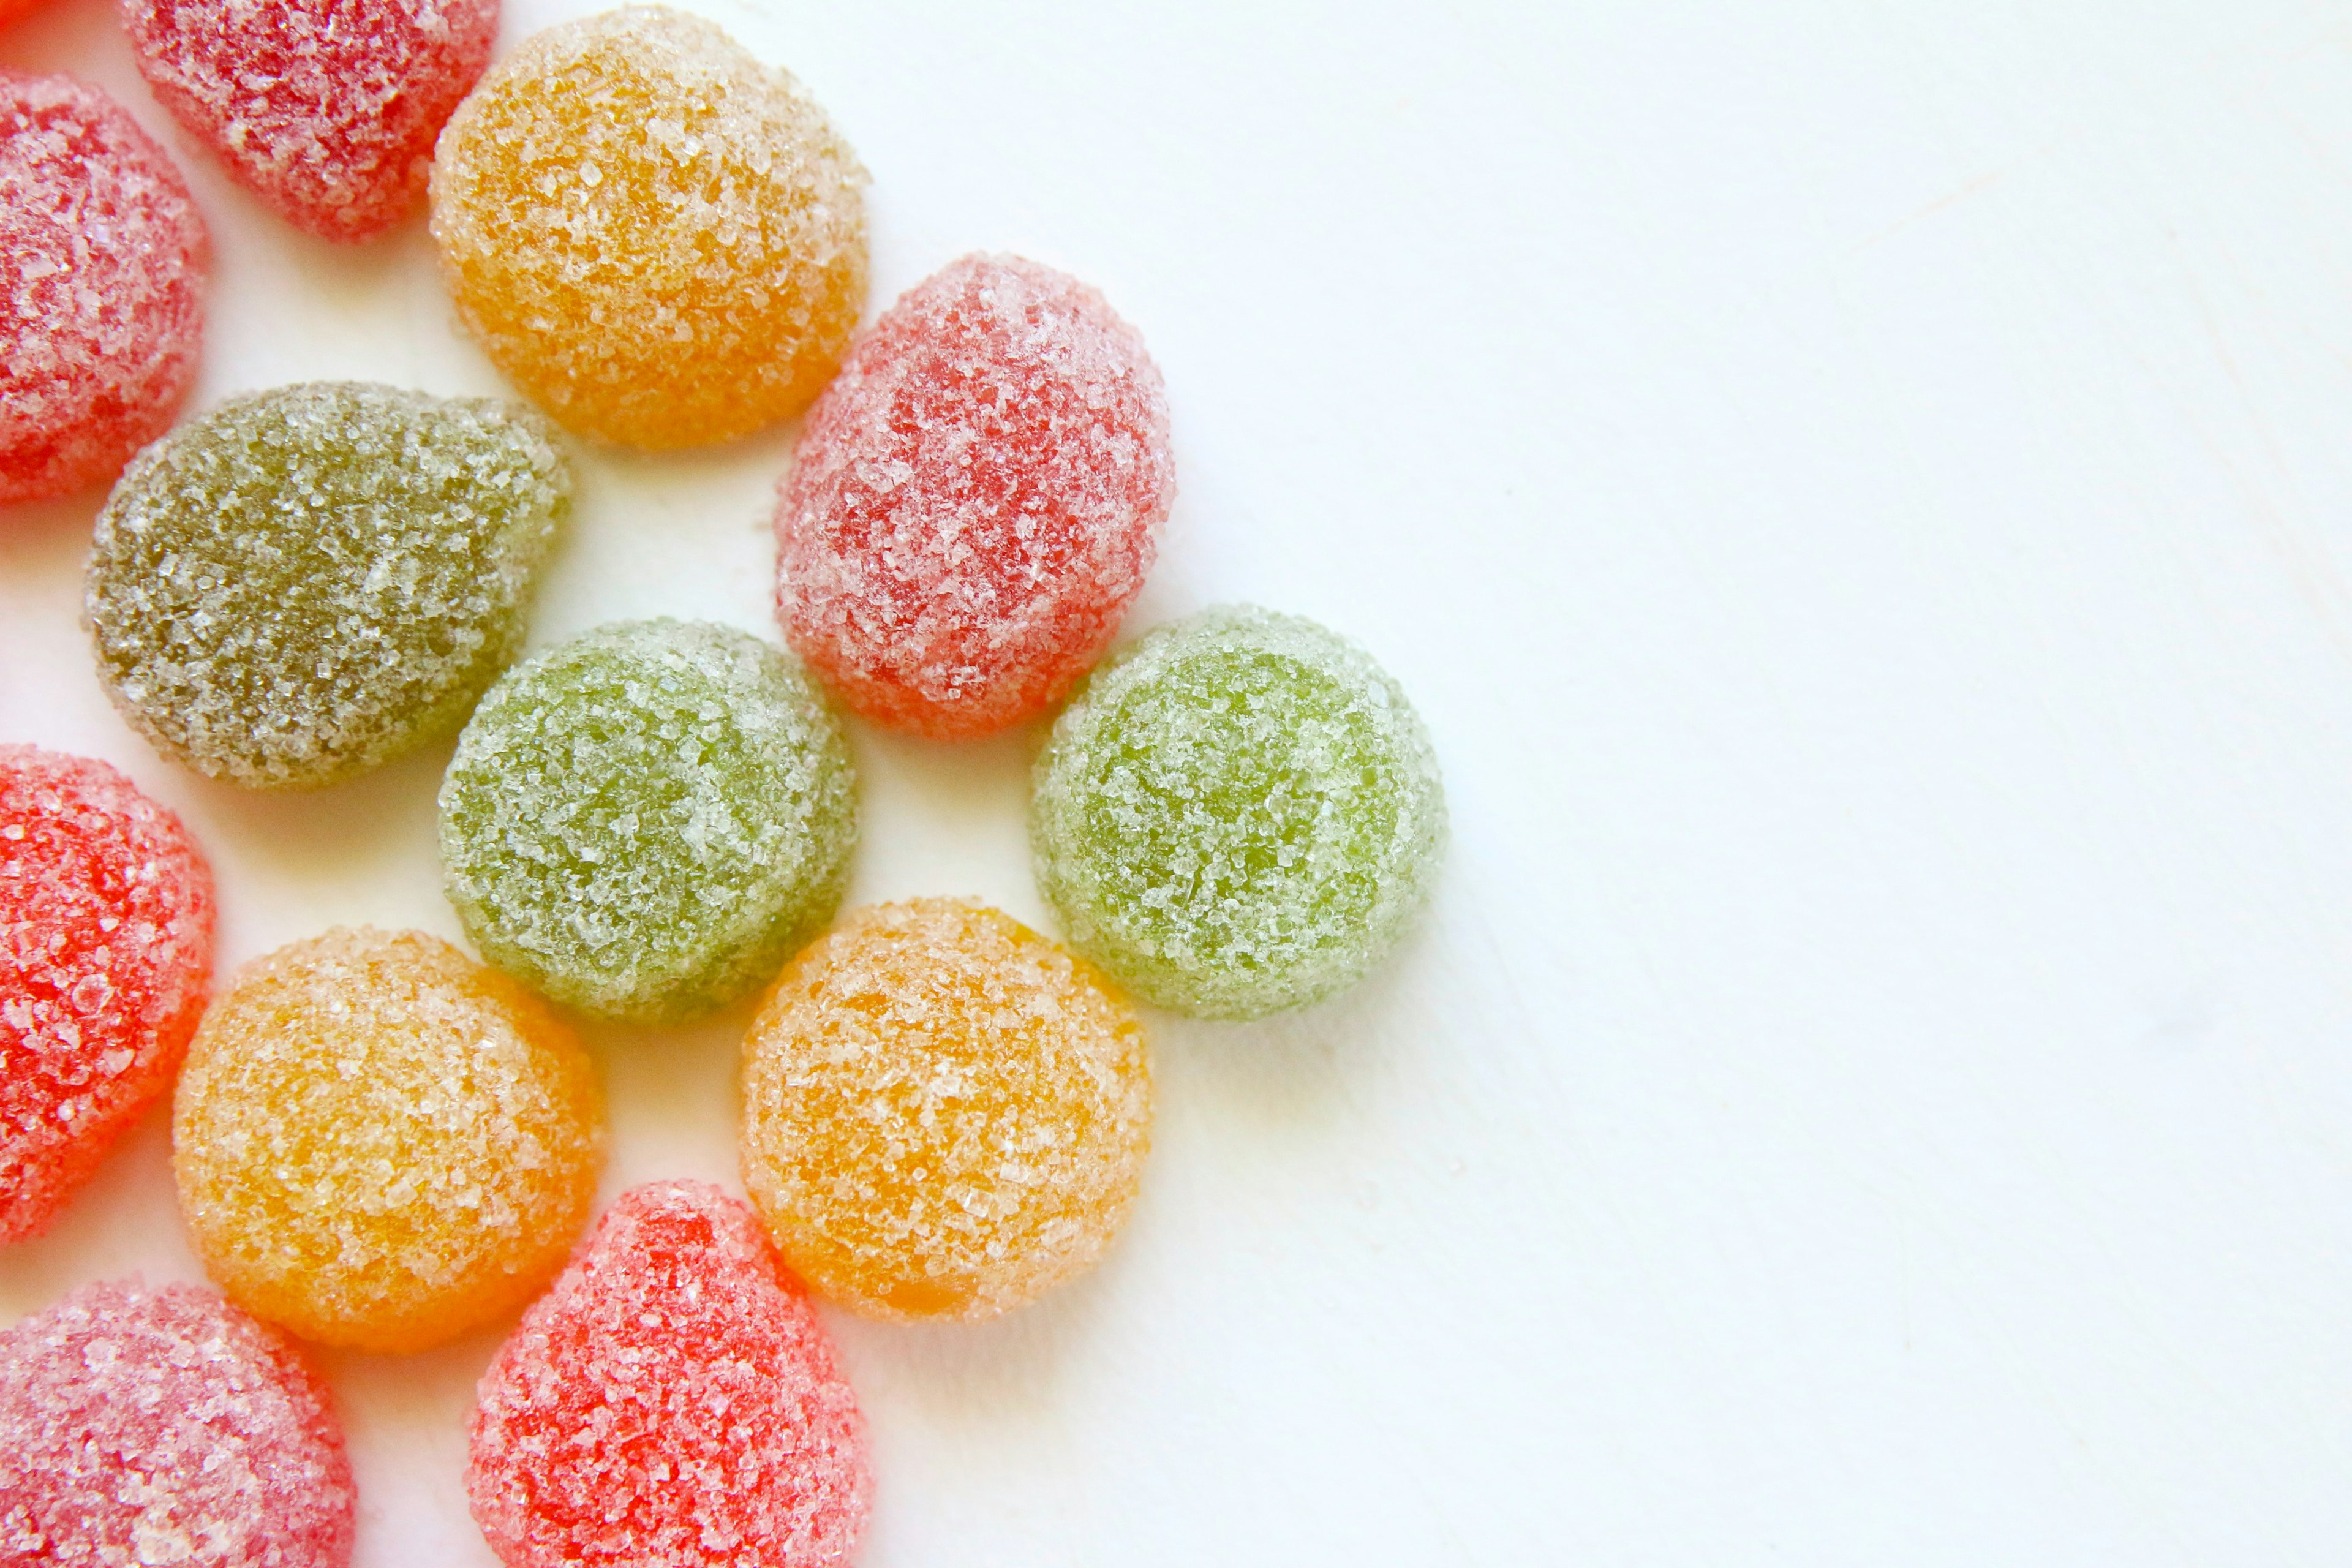 red, green, and yellow circular candies covered with sugar